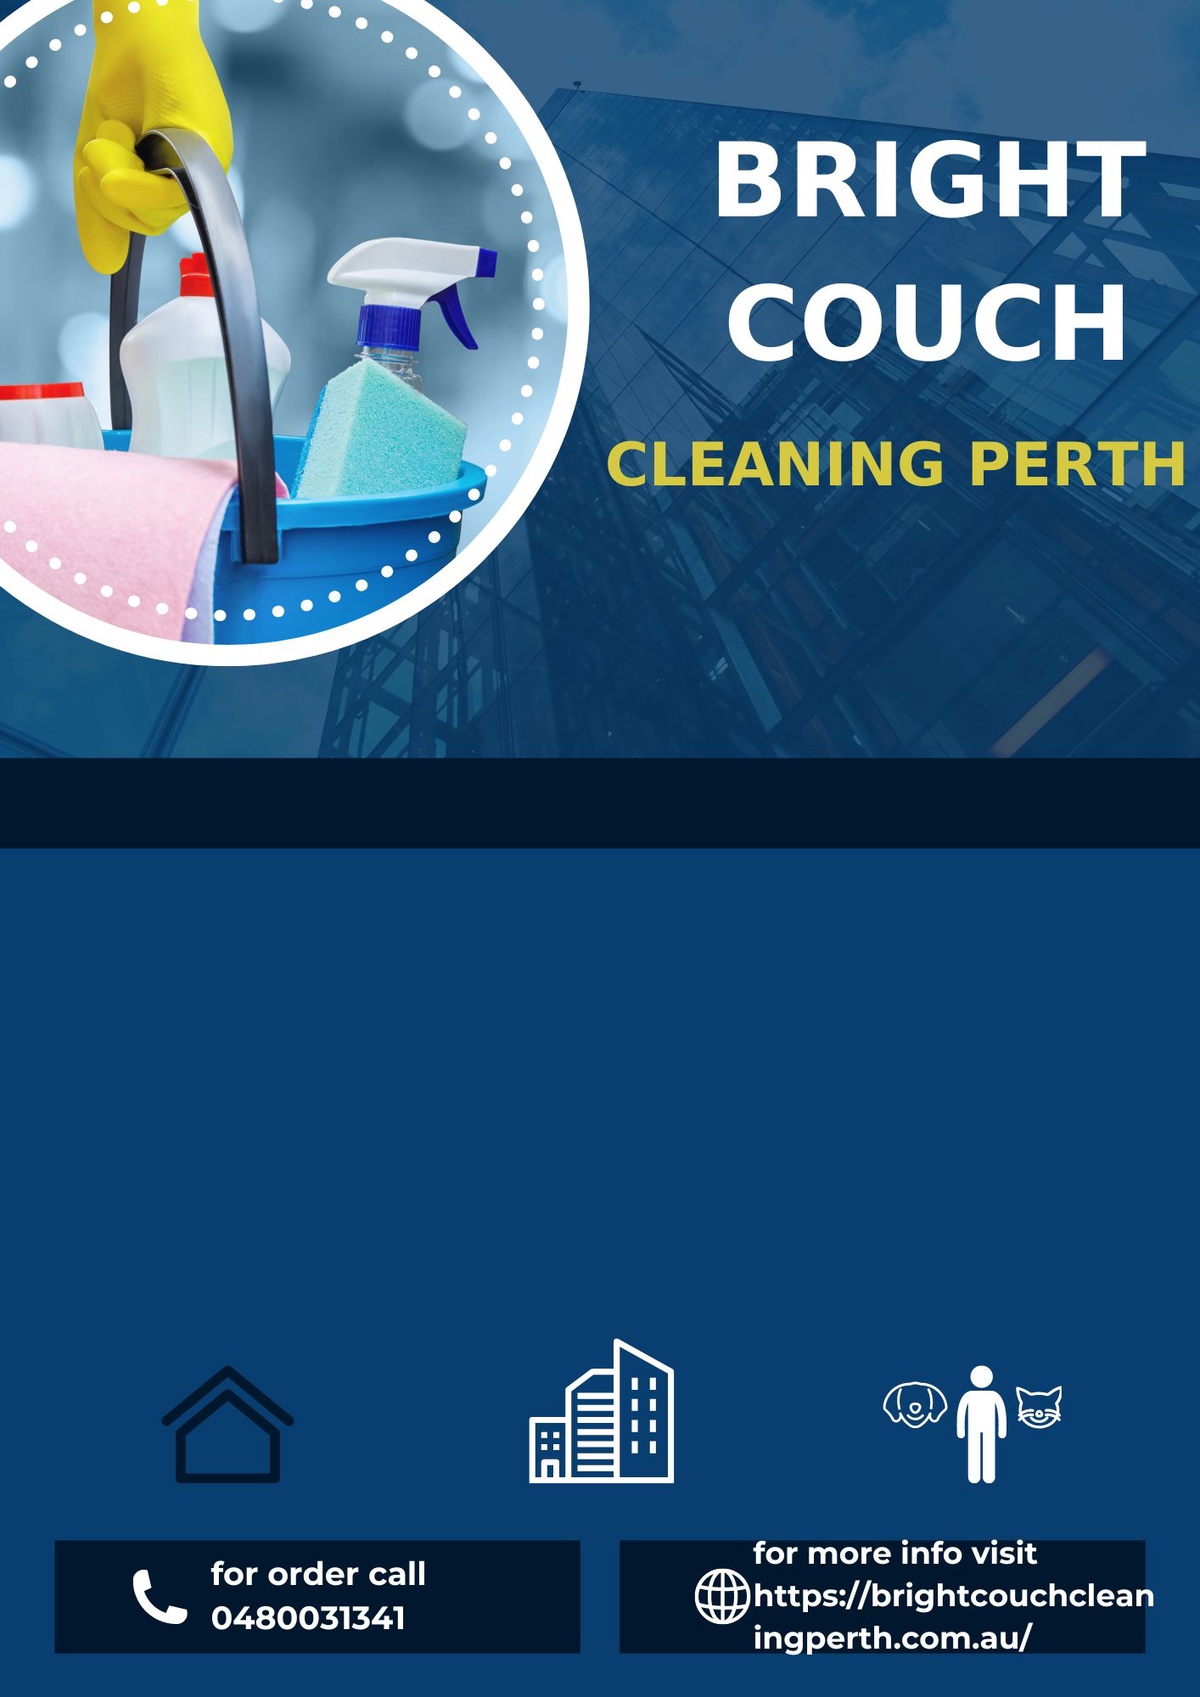 Premier Couch Cleaning Services in Perth